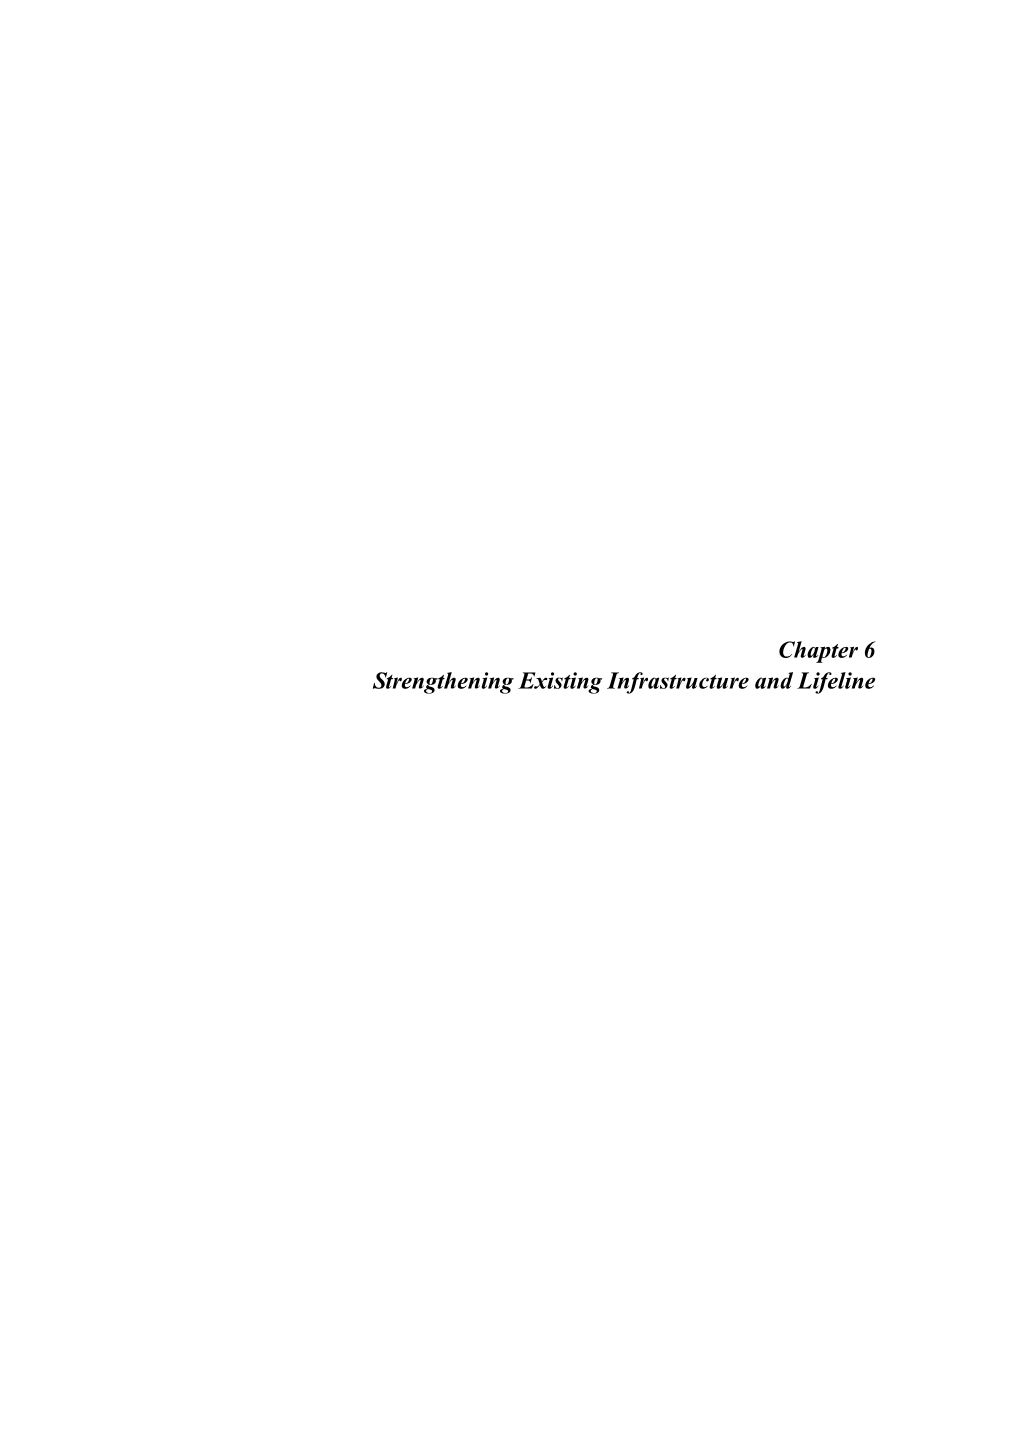 Chapter 6 Strengthening Existing Infrastructure and Lifeline Final Report Main Report